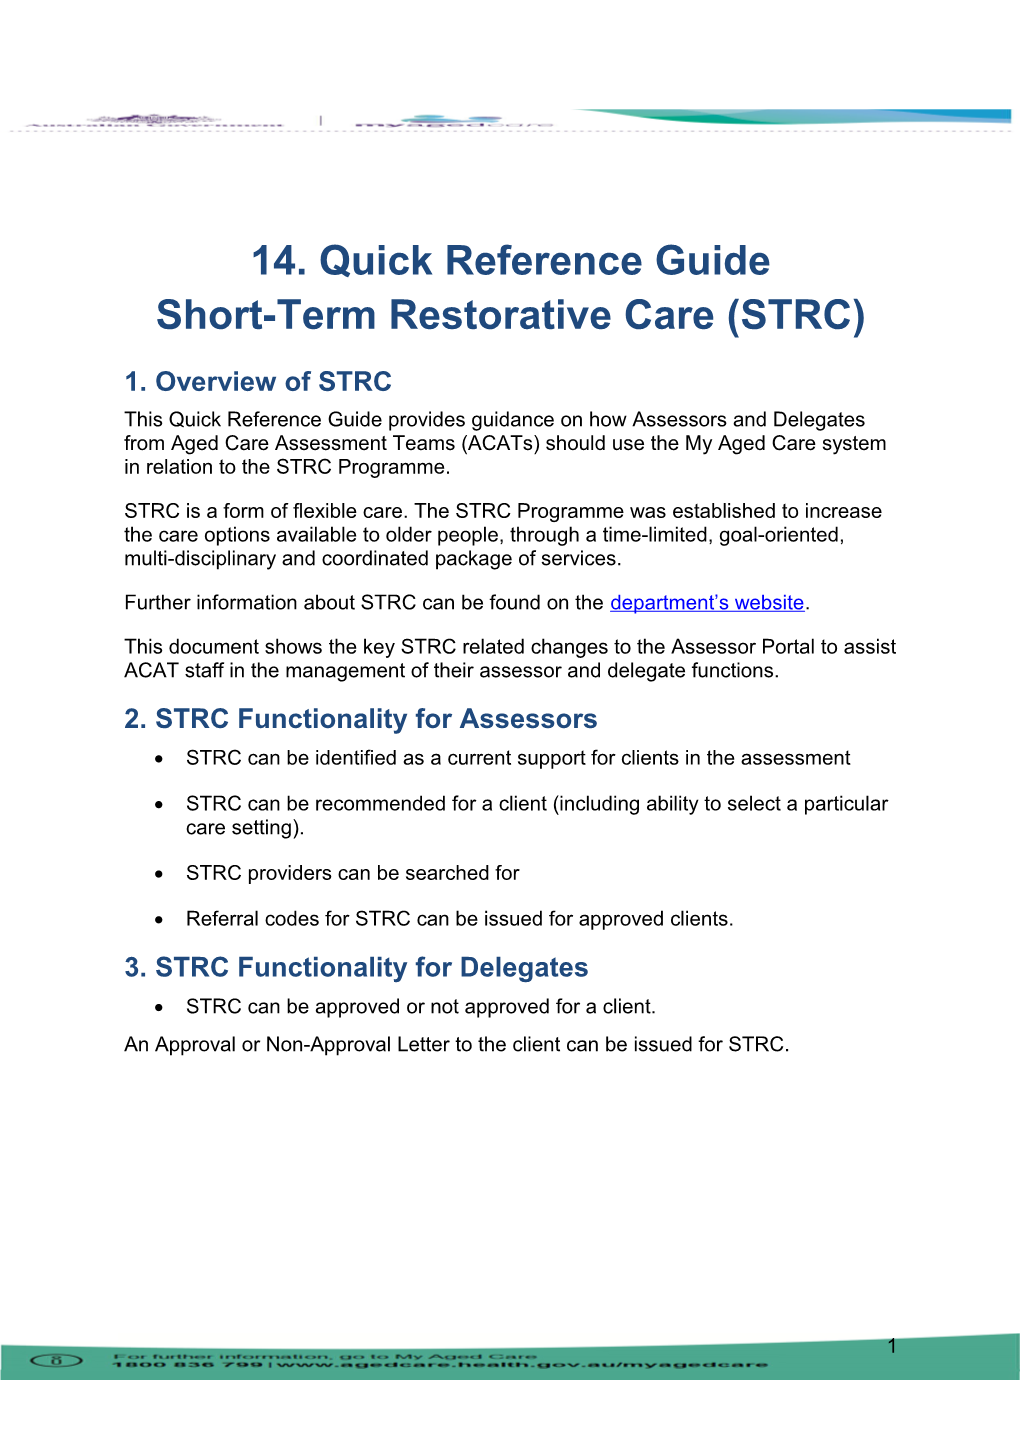 Quick Reference Guide 14 - Short-Term Restorative Care (STRC)